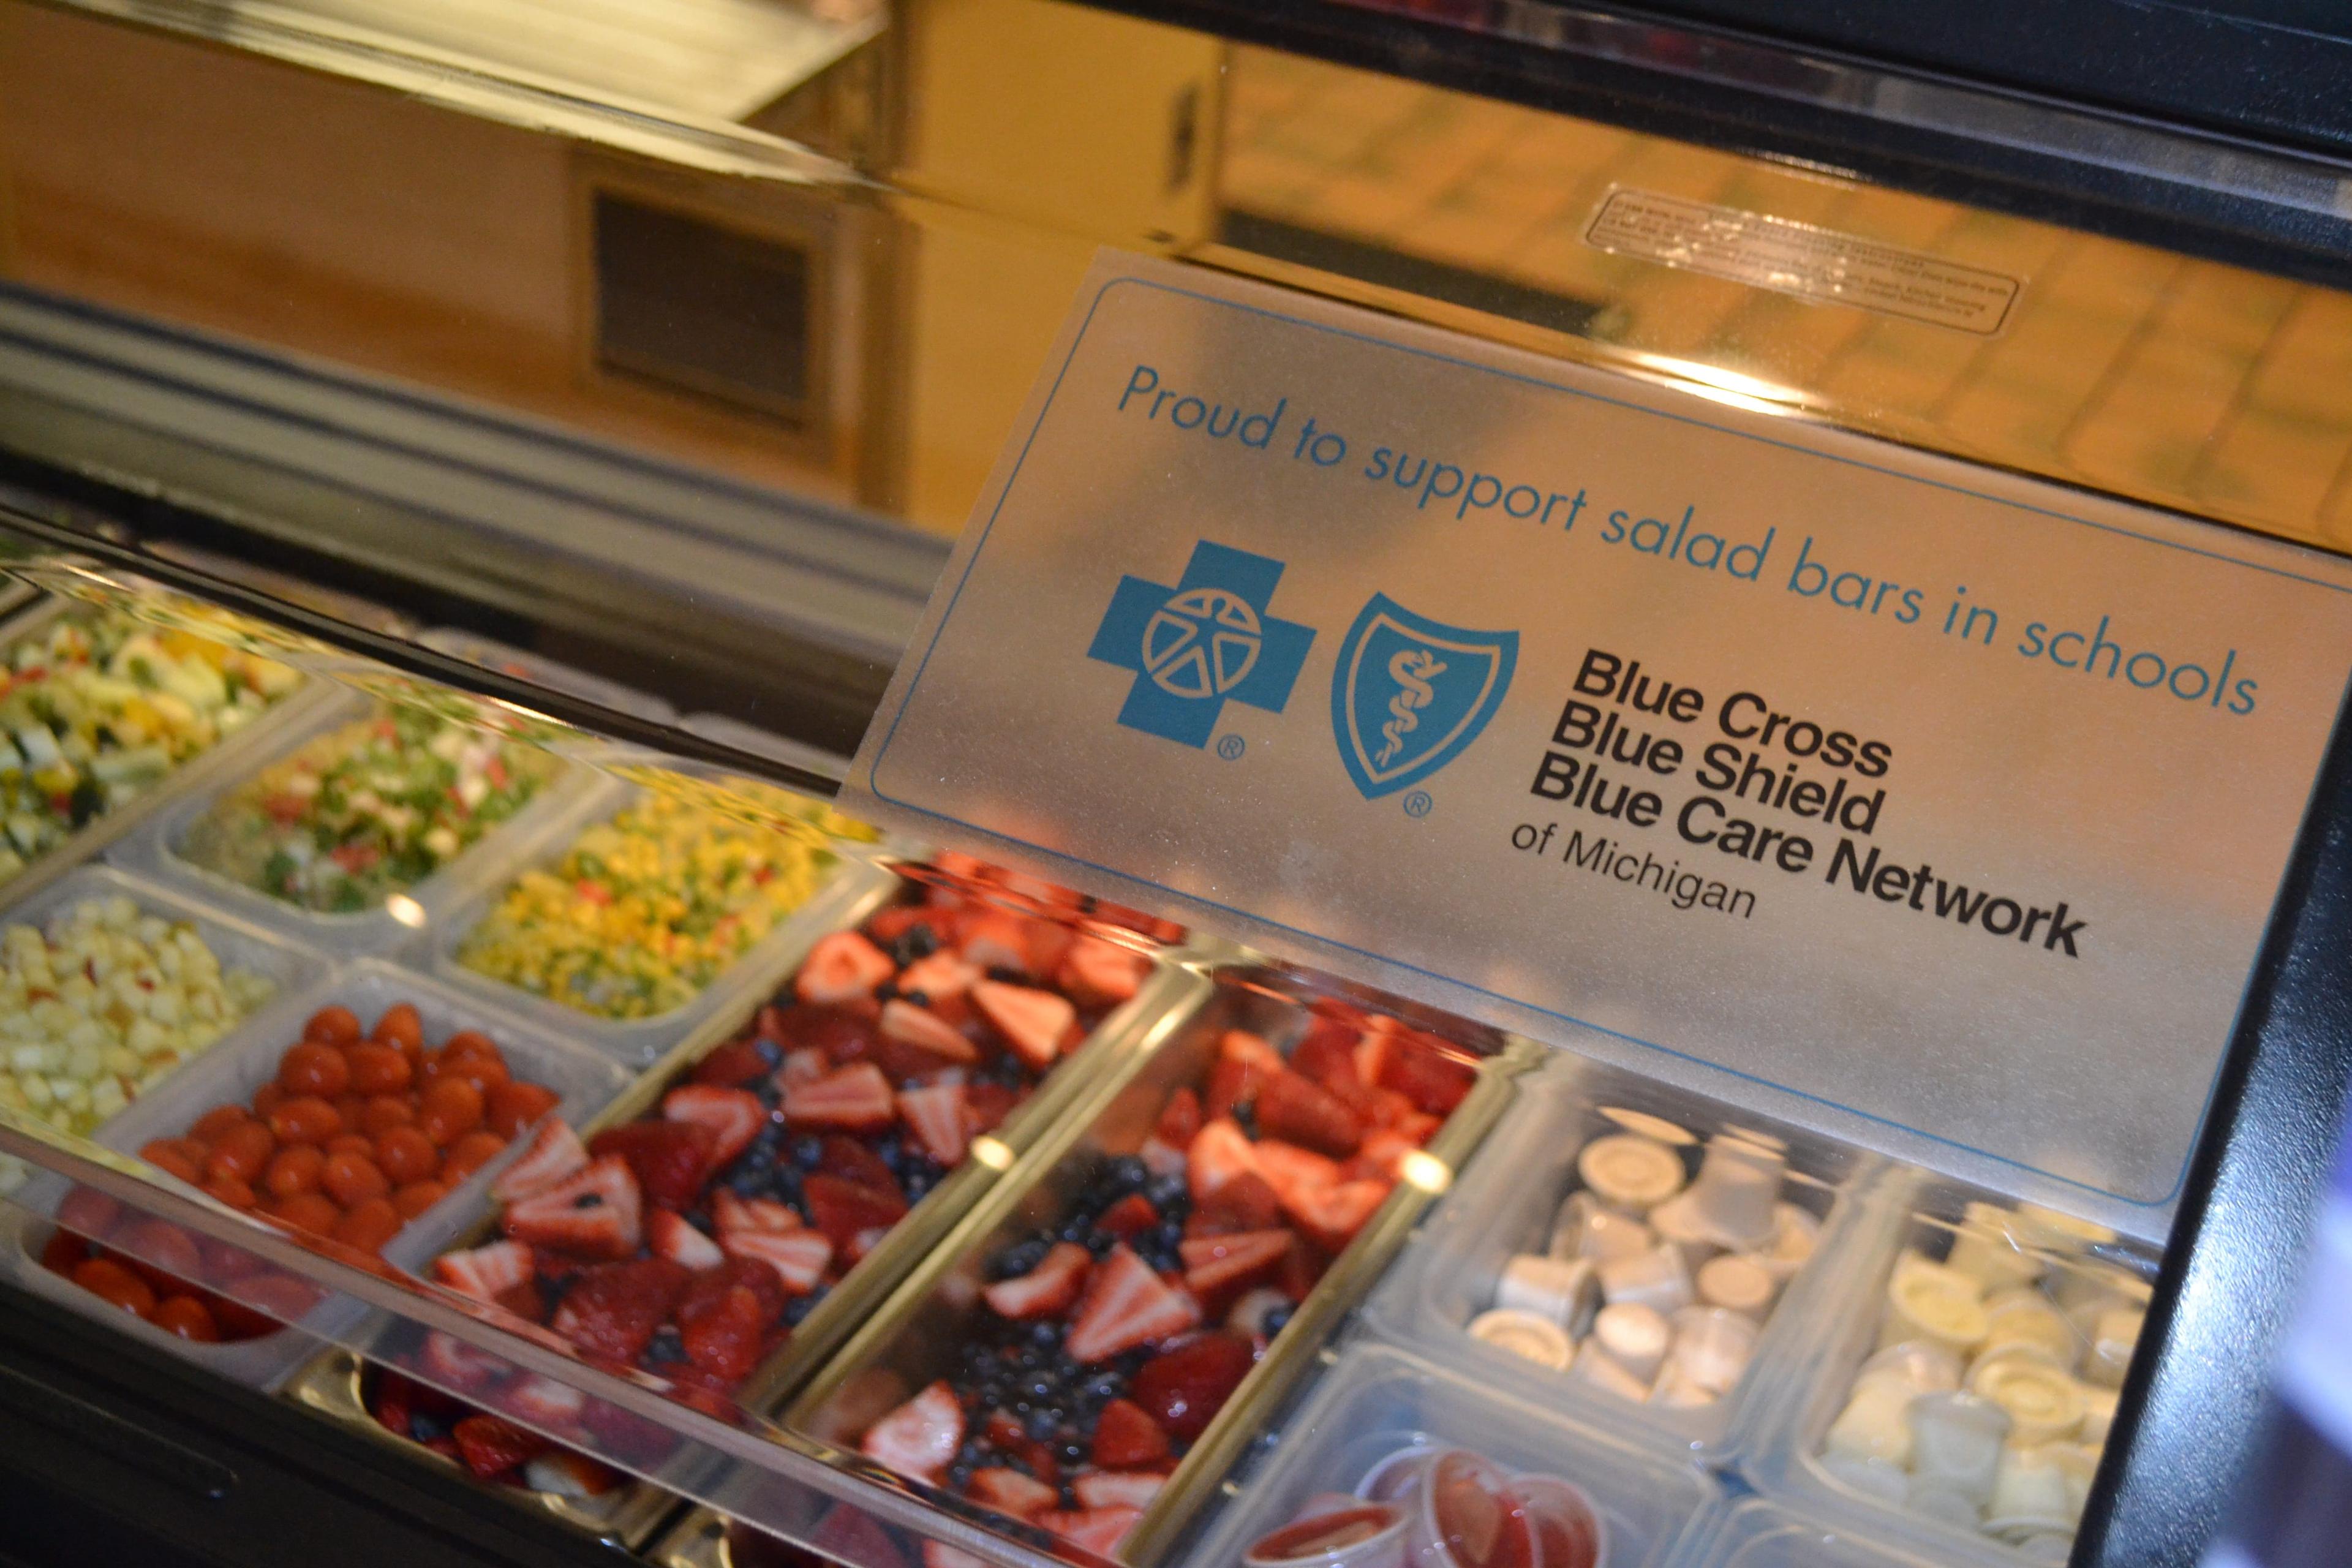 Image of a salad bar with sign that reads "Proud to support salad bars in schools" with the Blue Cross Blue Shield of Michigan and Blue Care Network logo